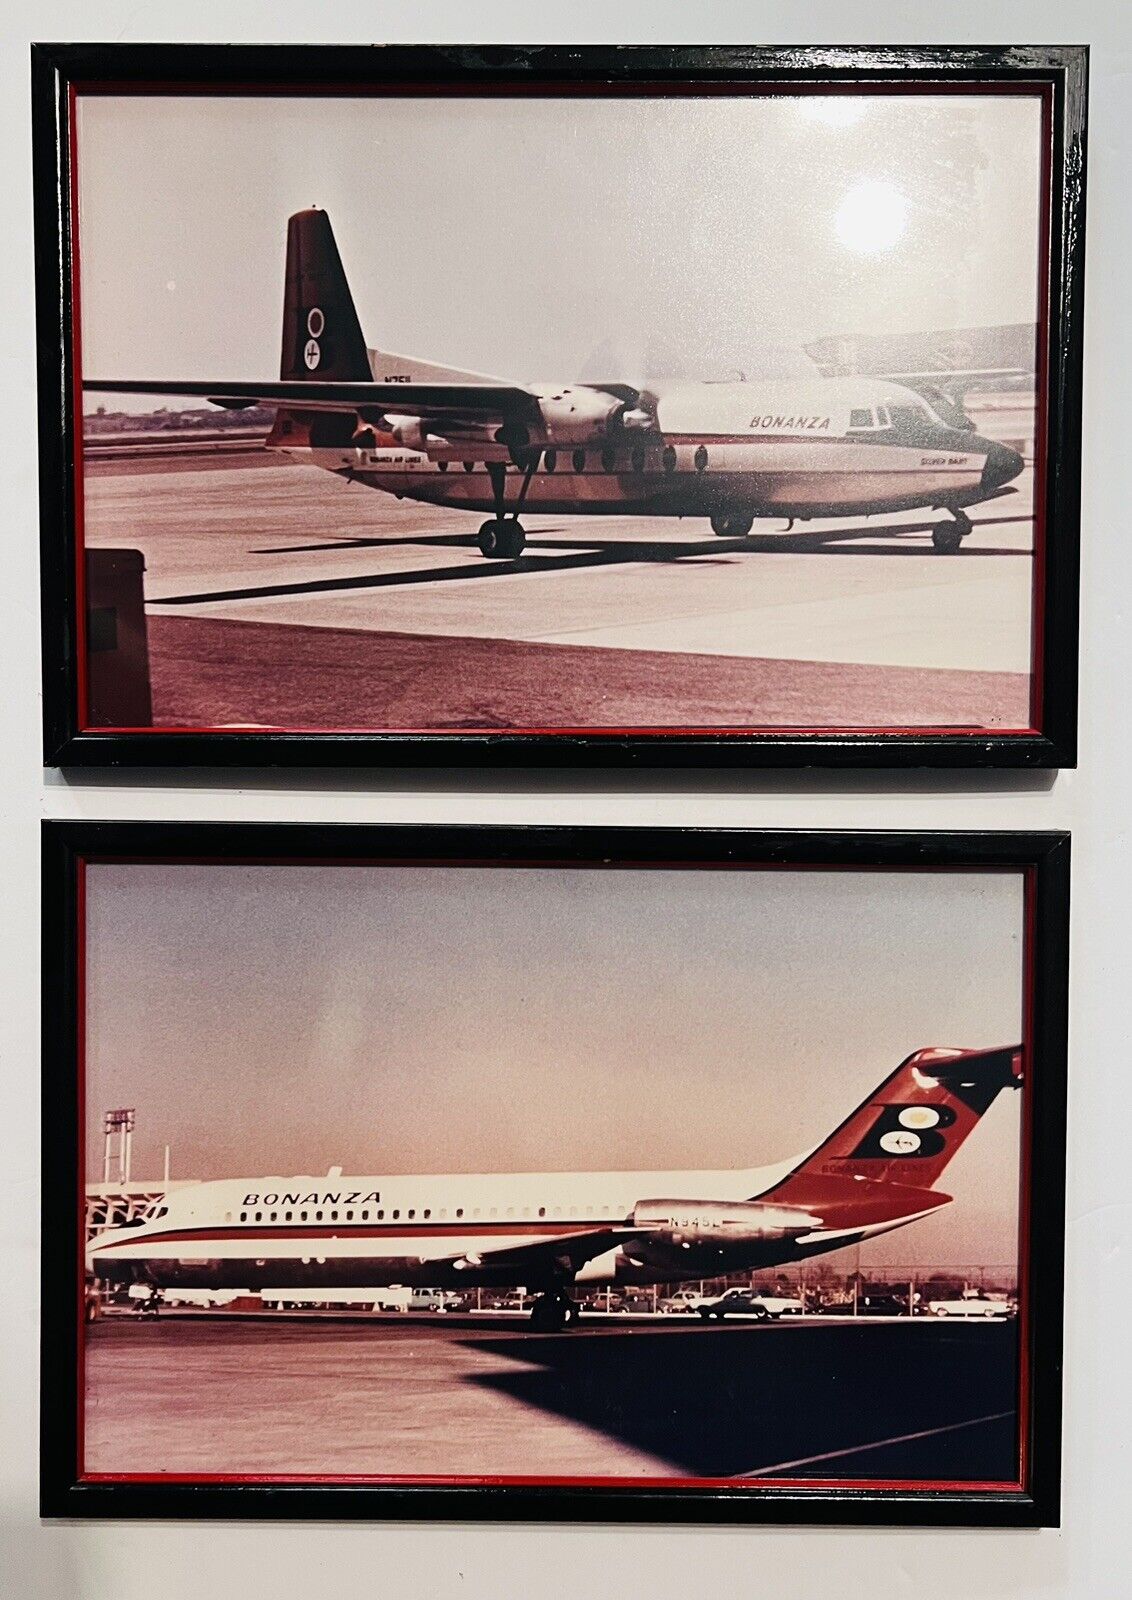 Lot Of 2 Vintage Bonanza Airline Photos DC-9 And Fairchild F-27A 1940-1950s